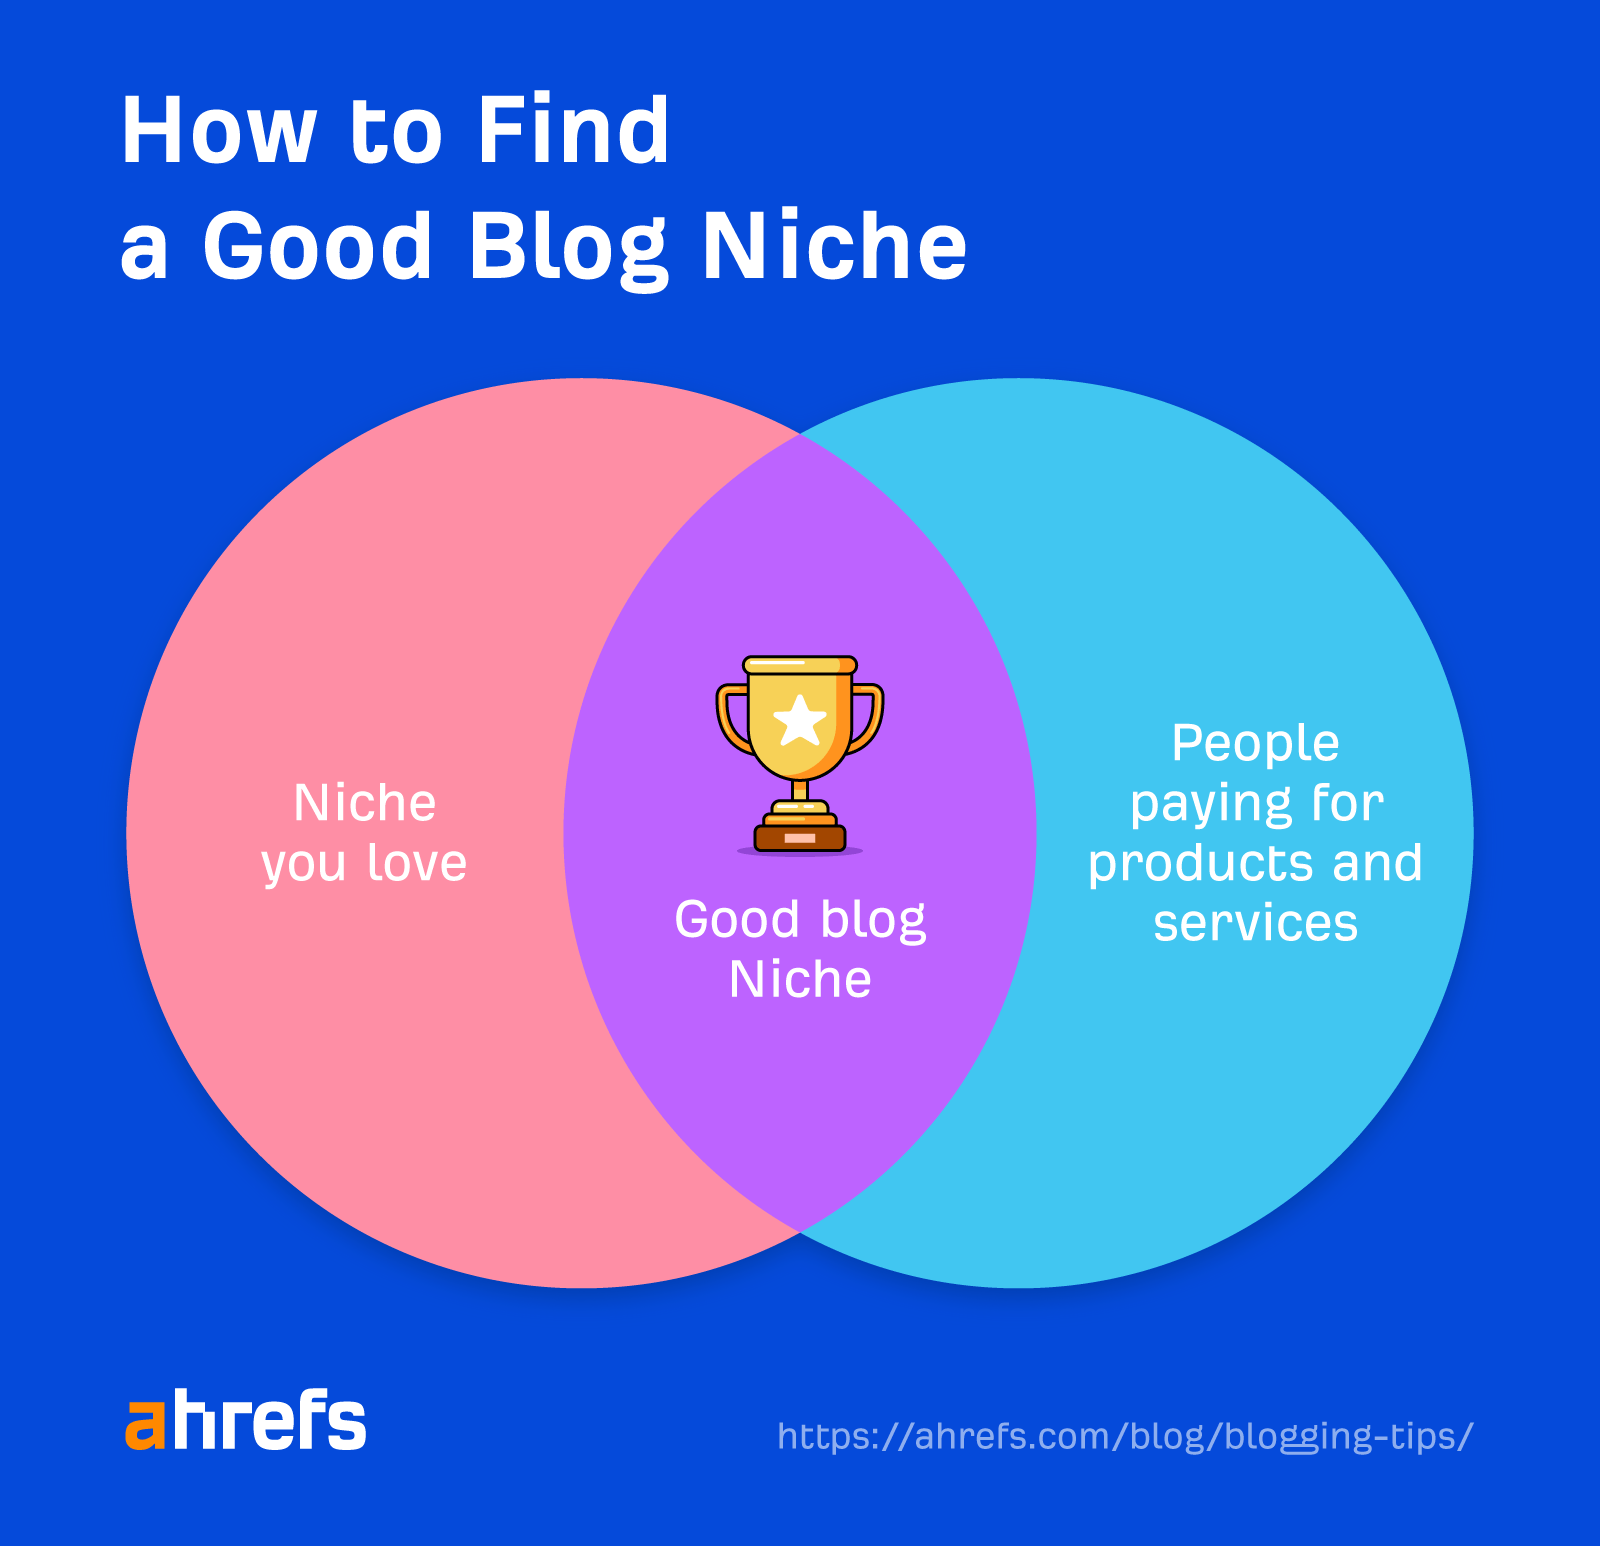 How to find a good blog niche